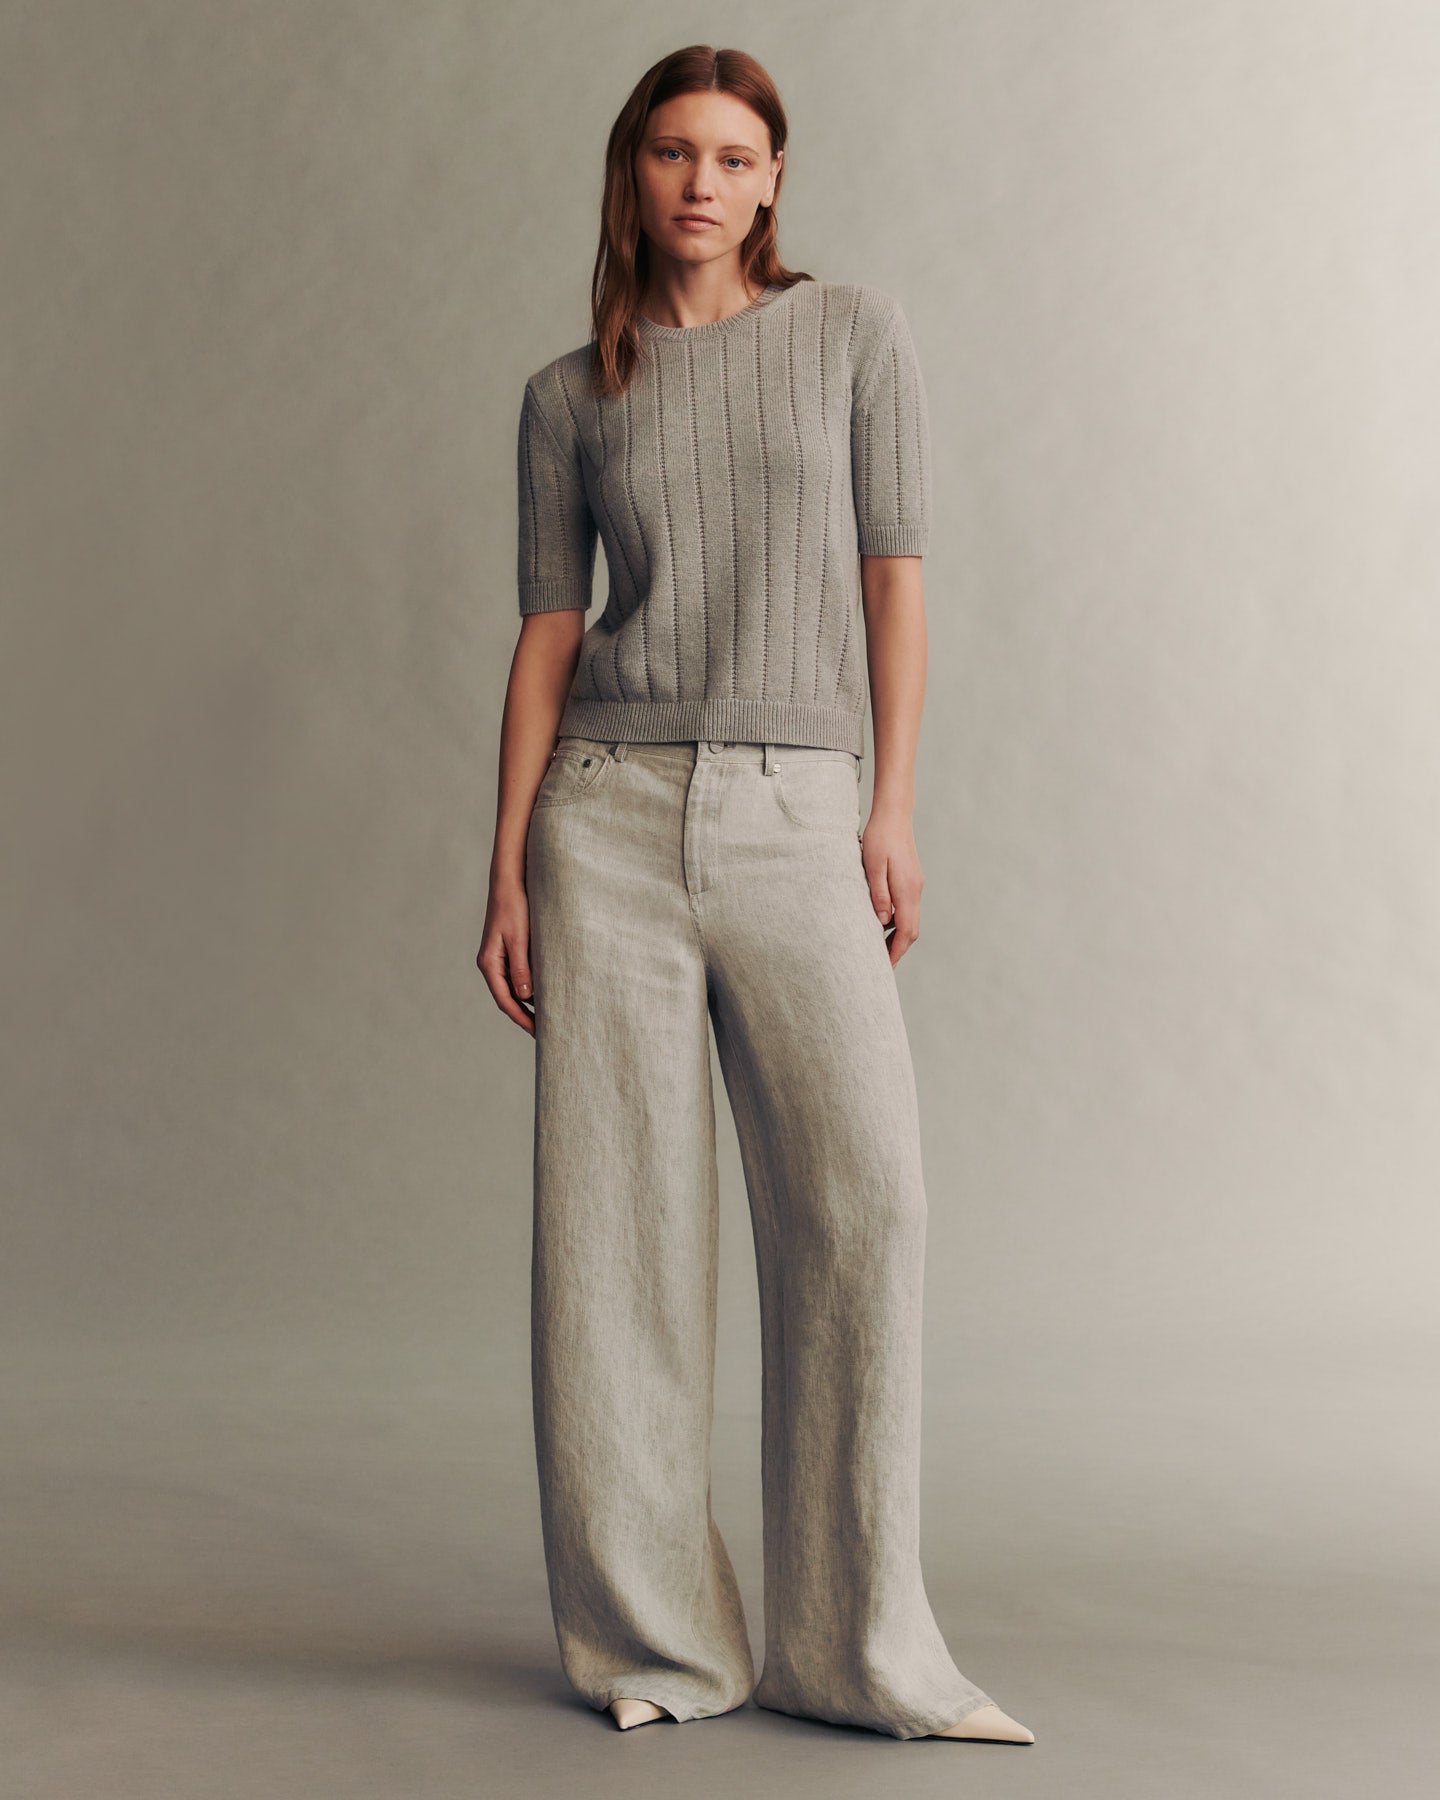 TWP Medium heather grey Audrey Crew with Pointelle Detail in Cashmere view 2